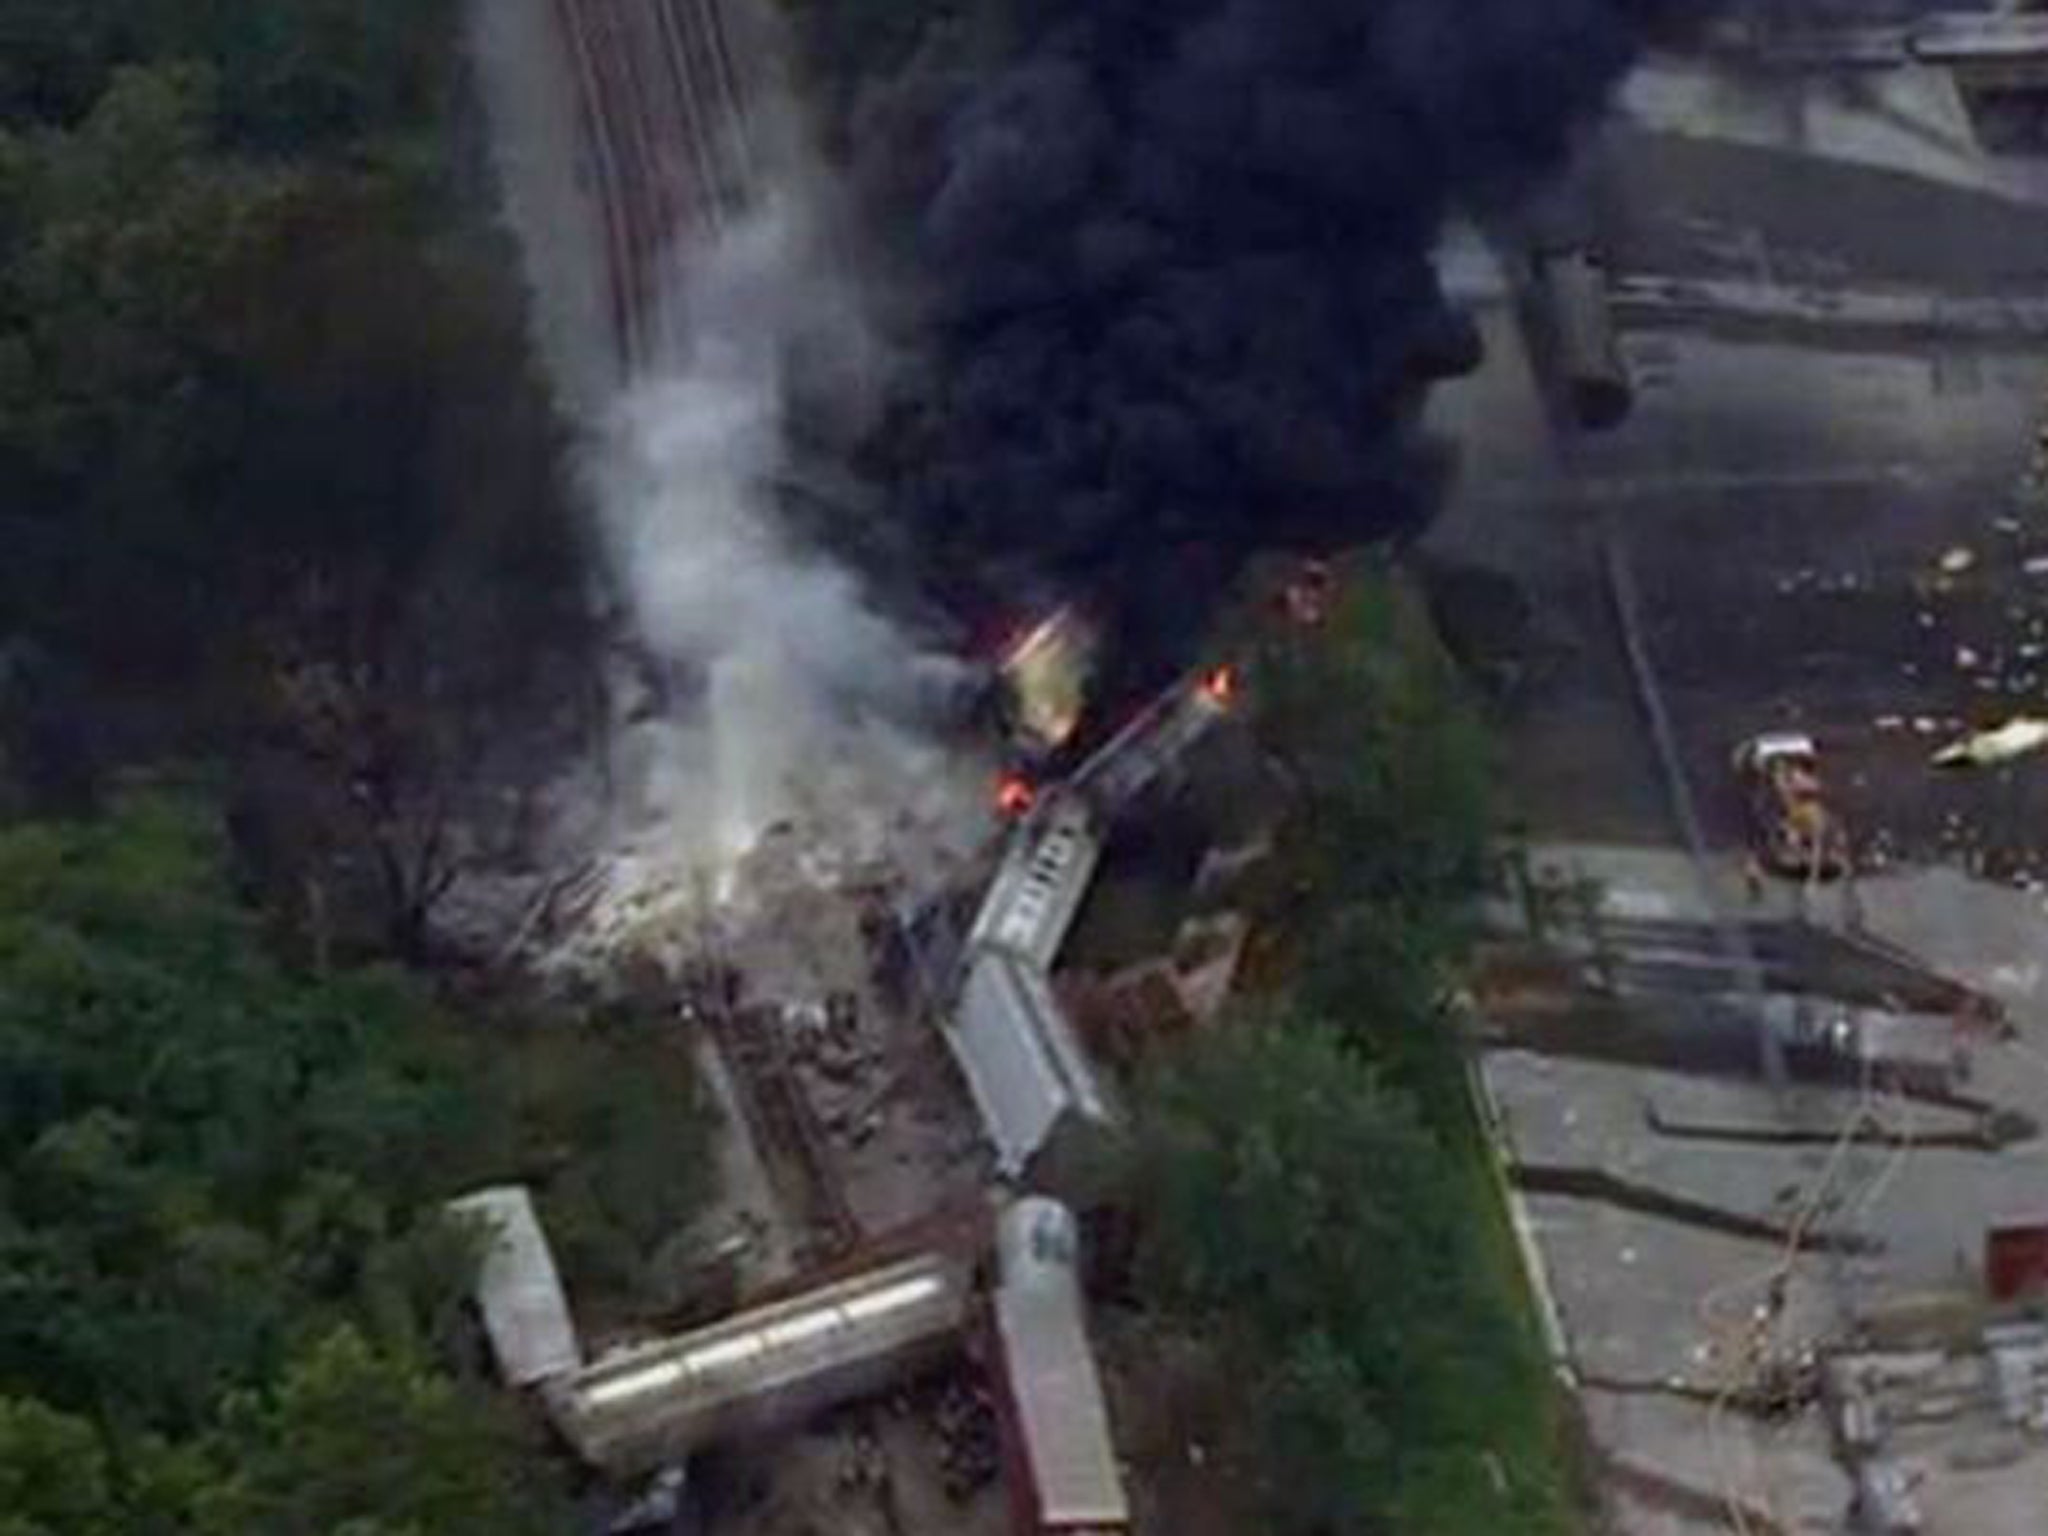 Local news pictures show smoke billowing from the train wreckage